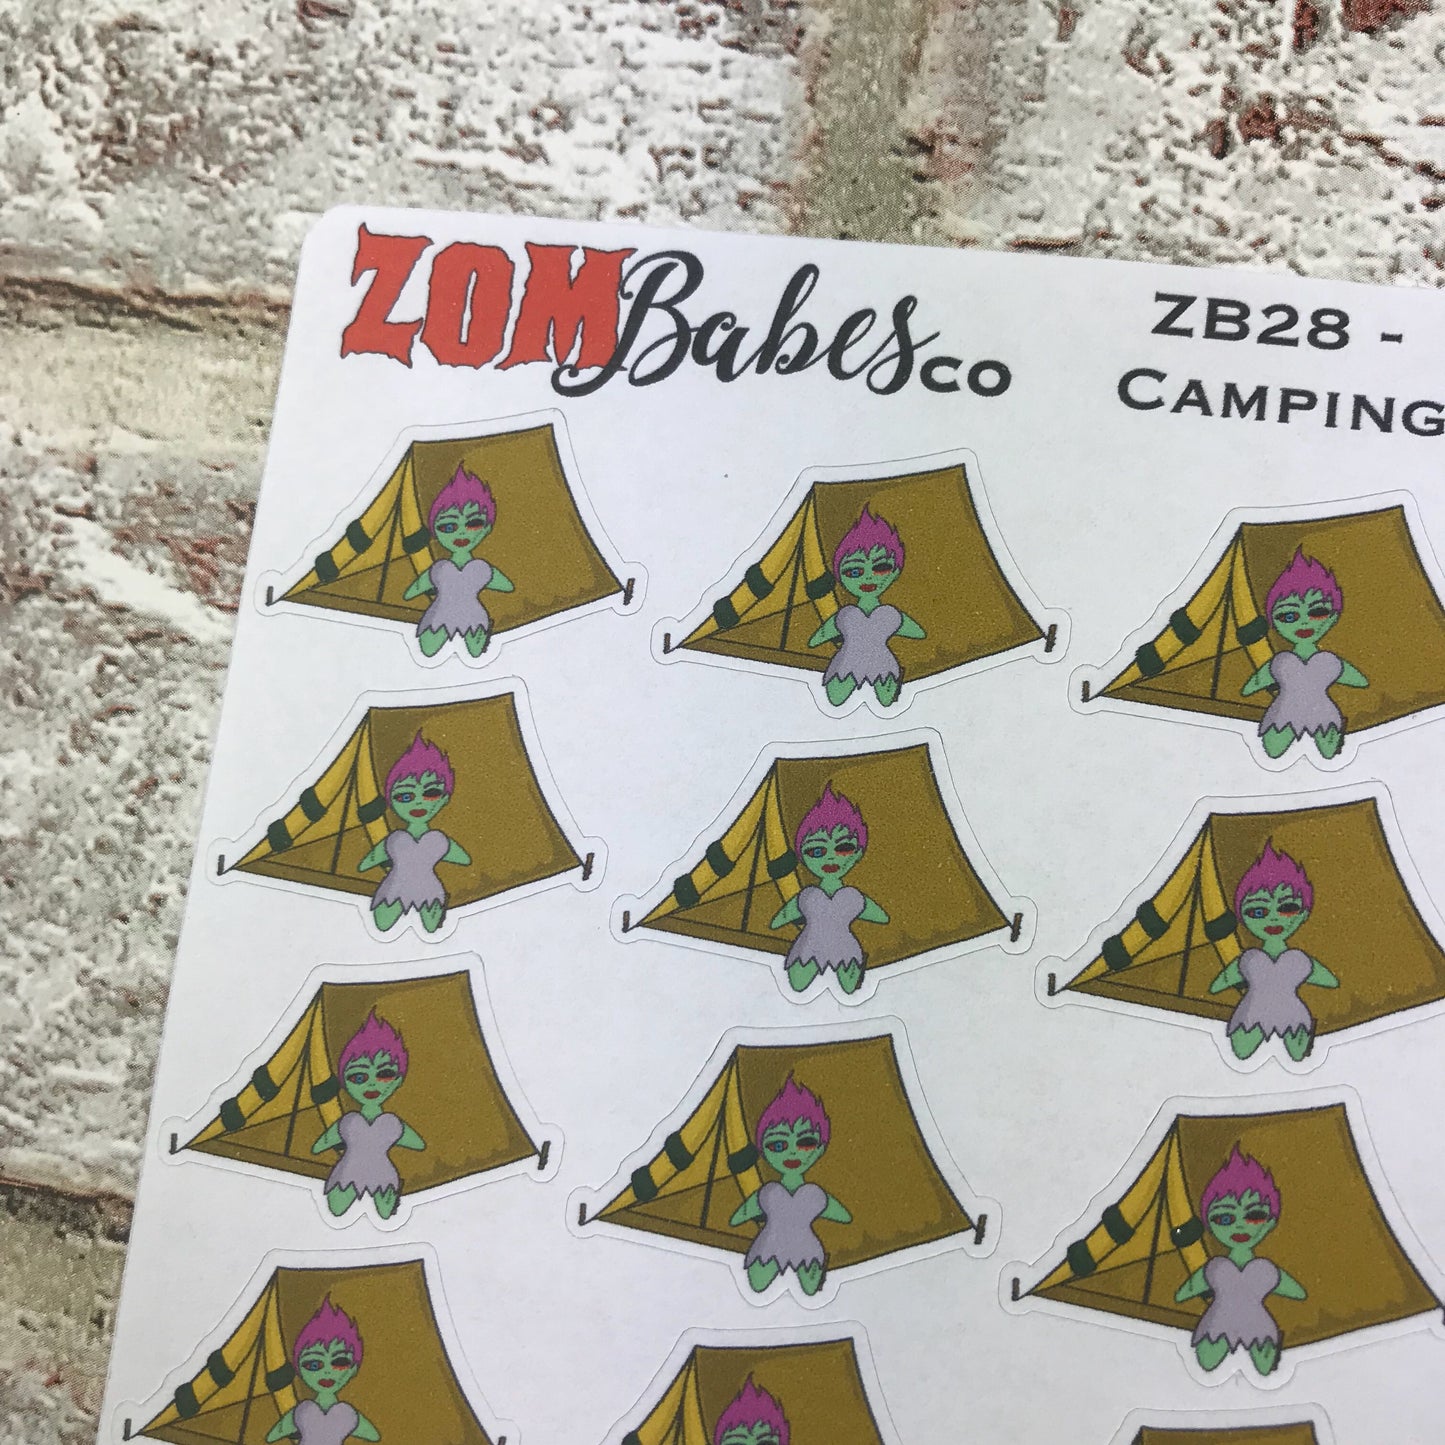 Camping / Tent Zombabe character sticker for planners (ZB28)